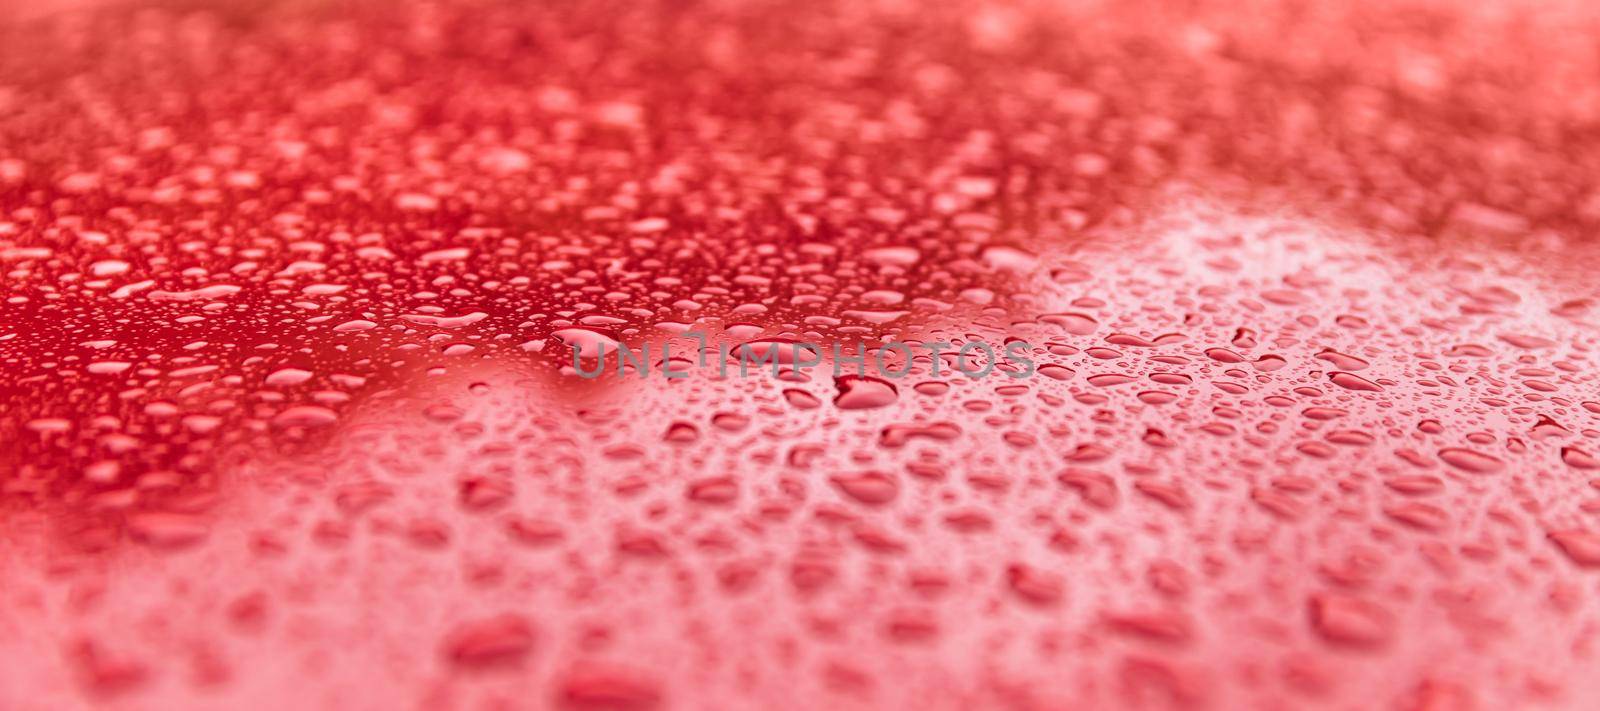 Rain drops on a red surface by palinchak